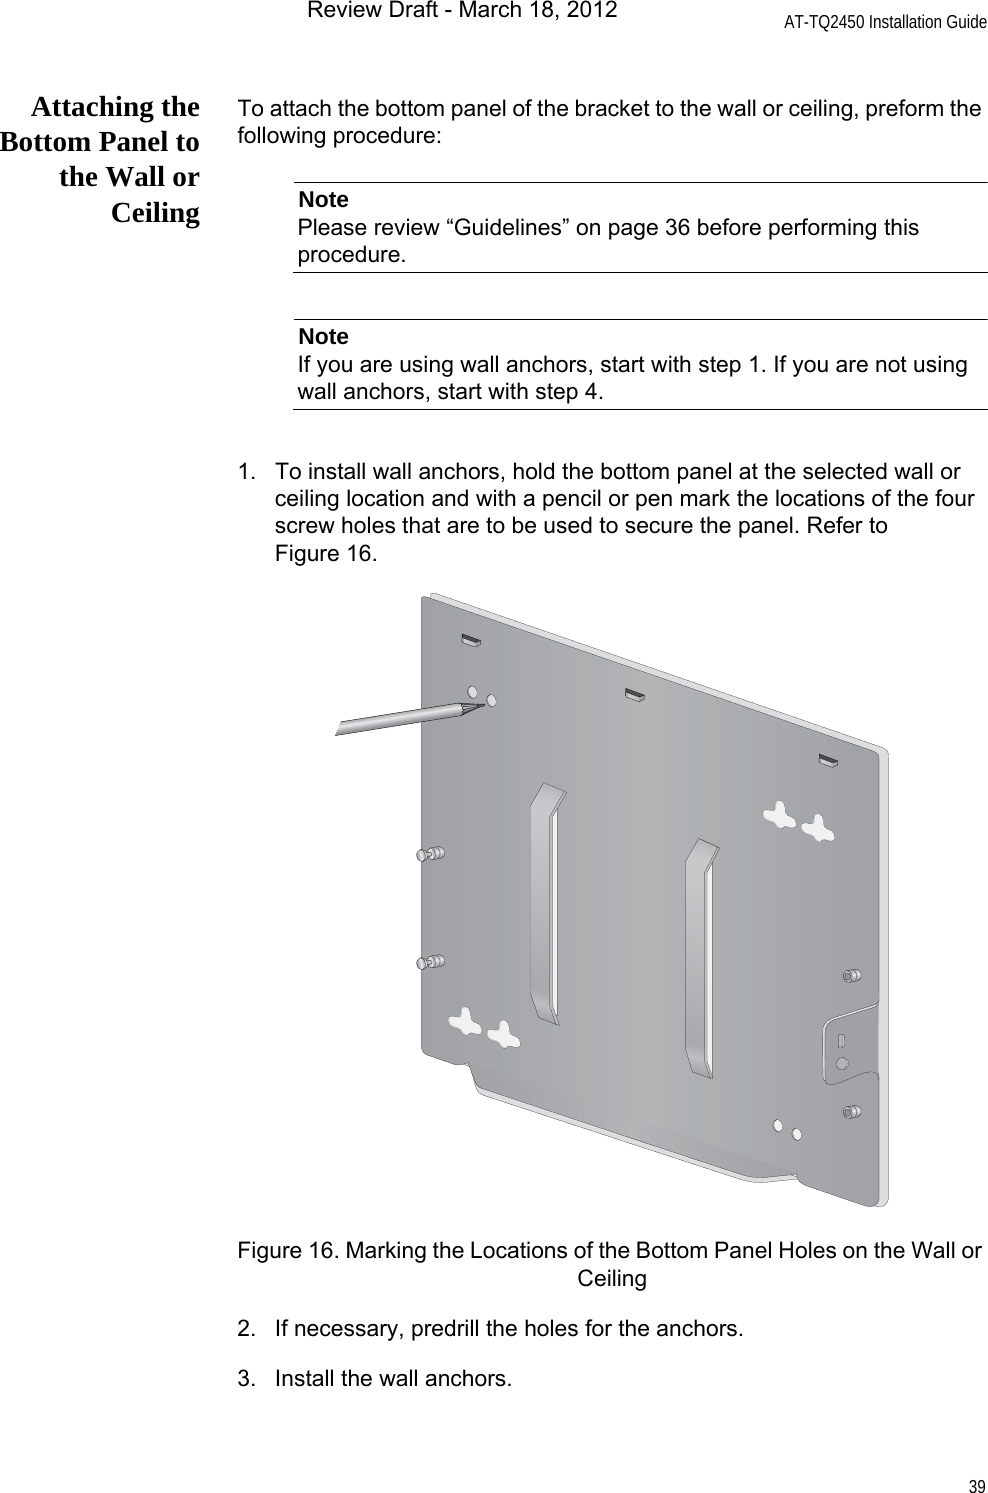 AT-TQ2450 Installation Guide39Attaching theBottom Panel tothe Wall orCeilingTo attach the bottom panel of the bracket to the wall or ceiling, preform the following procedure:NotePlease review “Guidelines” on page 36 before performing this procedure.NoteIf you are using wall anchors, start with step 1. If you are not using wall anchors, start with step 4.1. To install wall anchors, hold the bottom panel at the selected wall or ceiling location and with a pencil or pen mark the locations of the four screw holes that are to be used to secure the panel. Refer to Figure 16.Figure 16. Marking the Locations of the Bottom Panel Holes on the Wall or Ceiling2. If necessary, predrill the holes for the anchors.3. Install the wall anchors.Review Draft - March 18, 2012